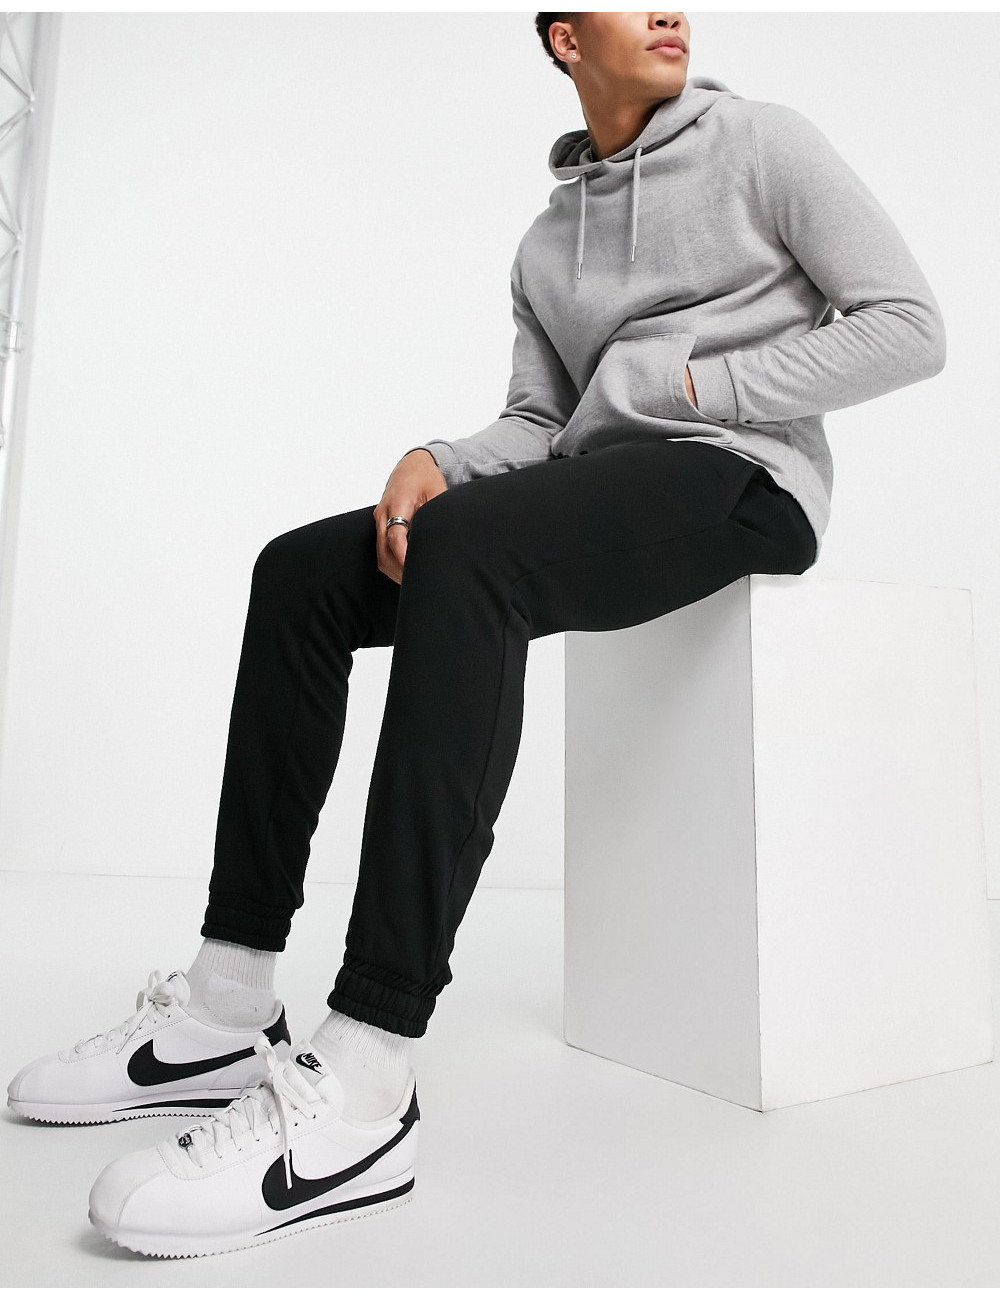 New Look joggers in black